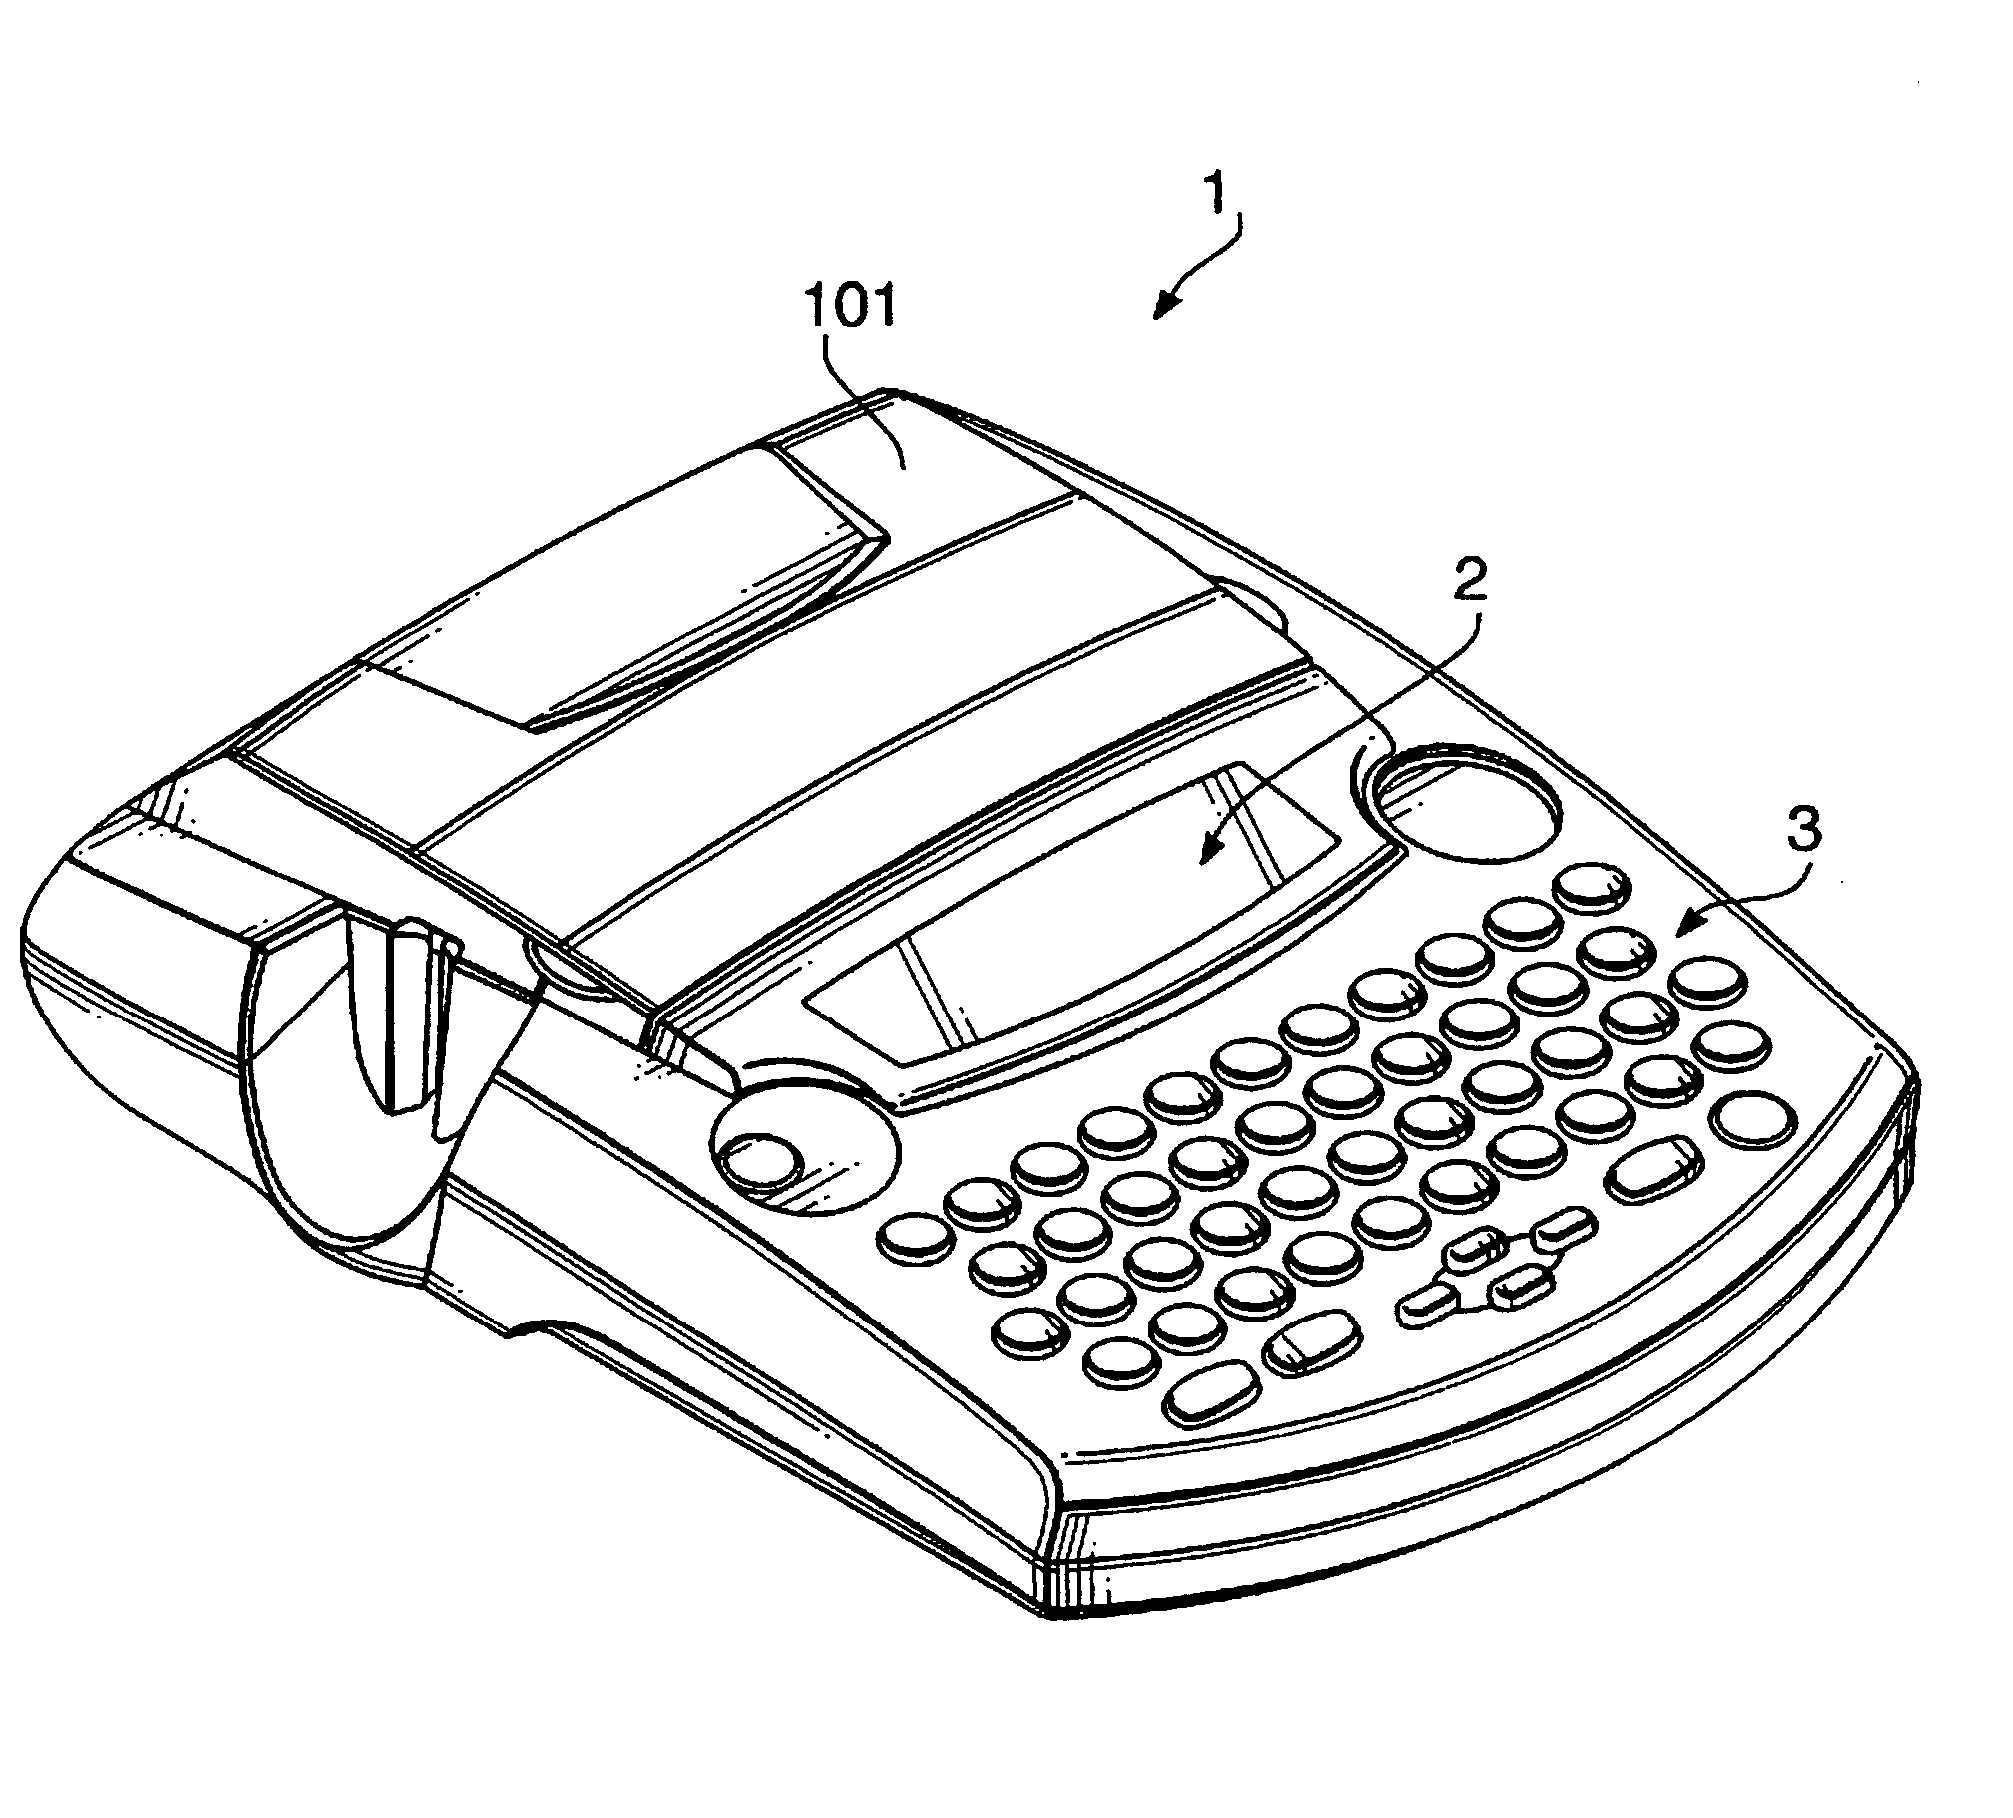 Tape print control device and program